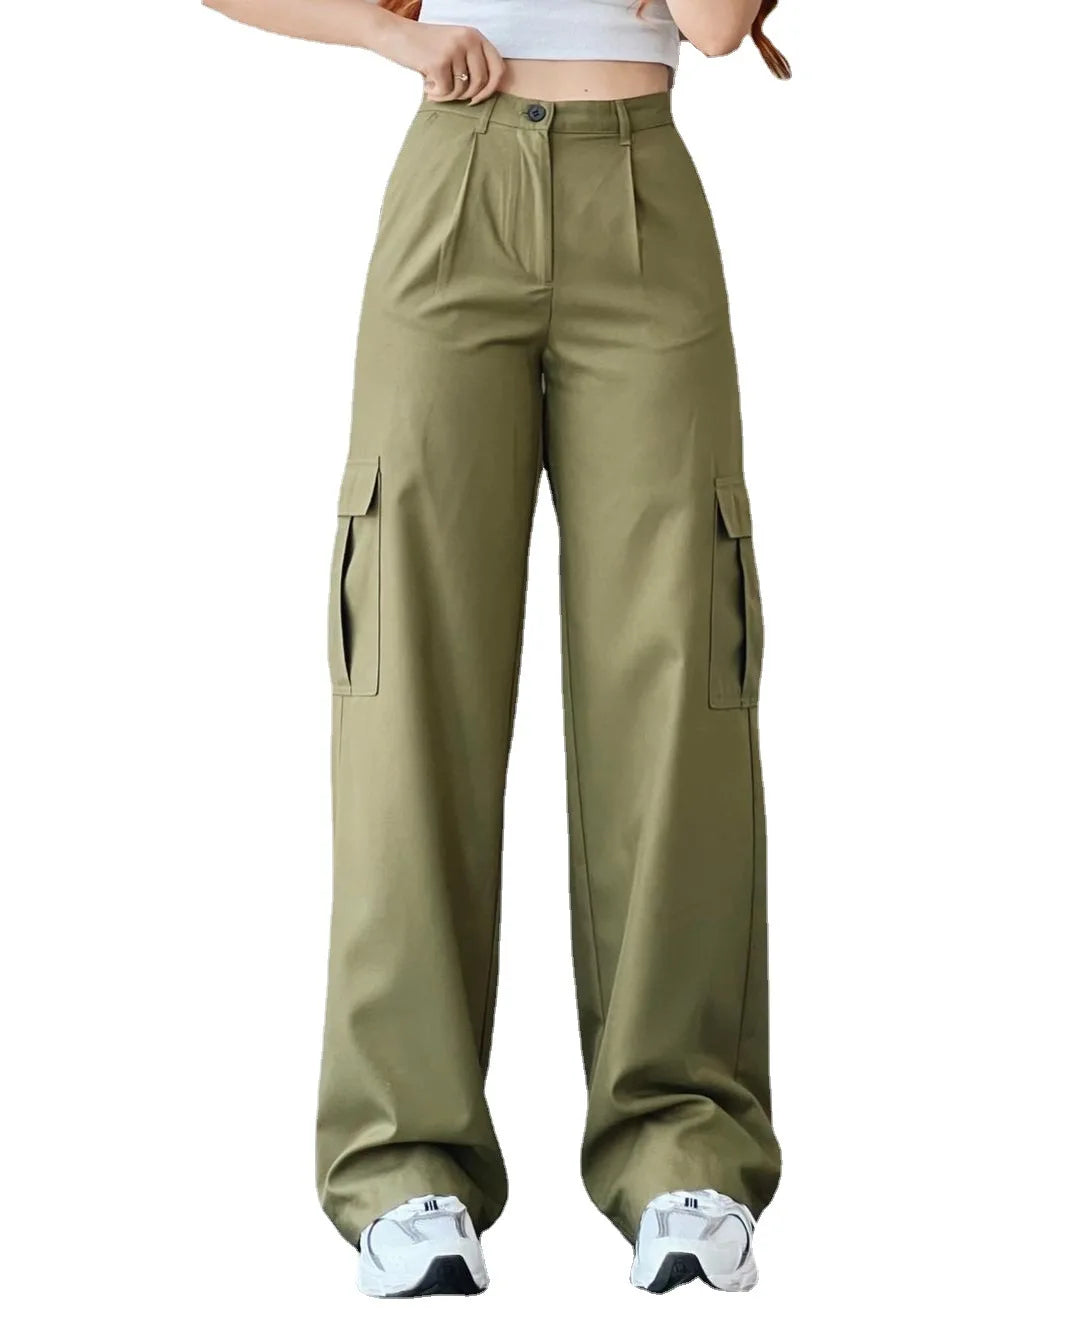 Style Baggy Trousers